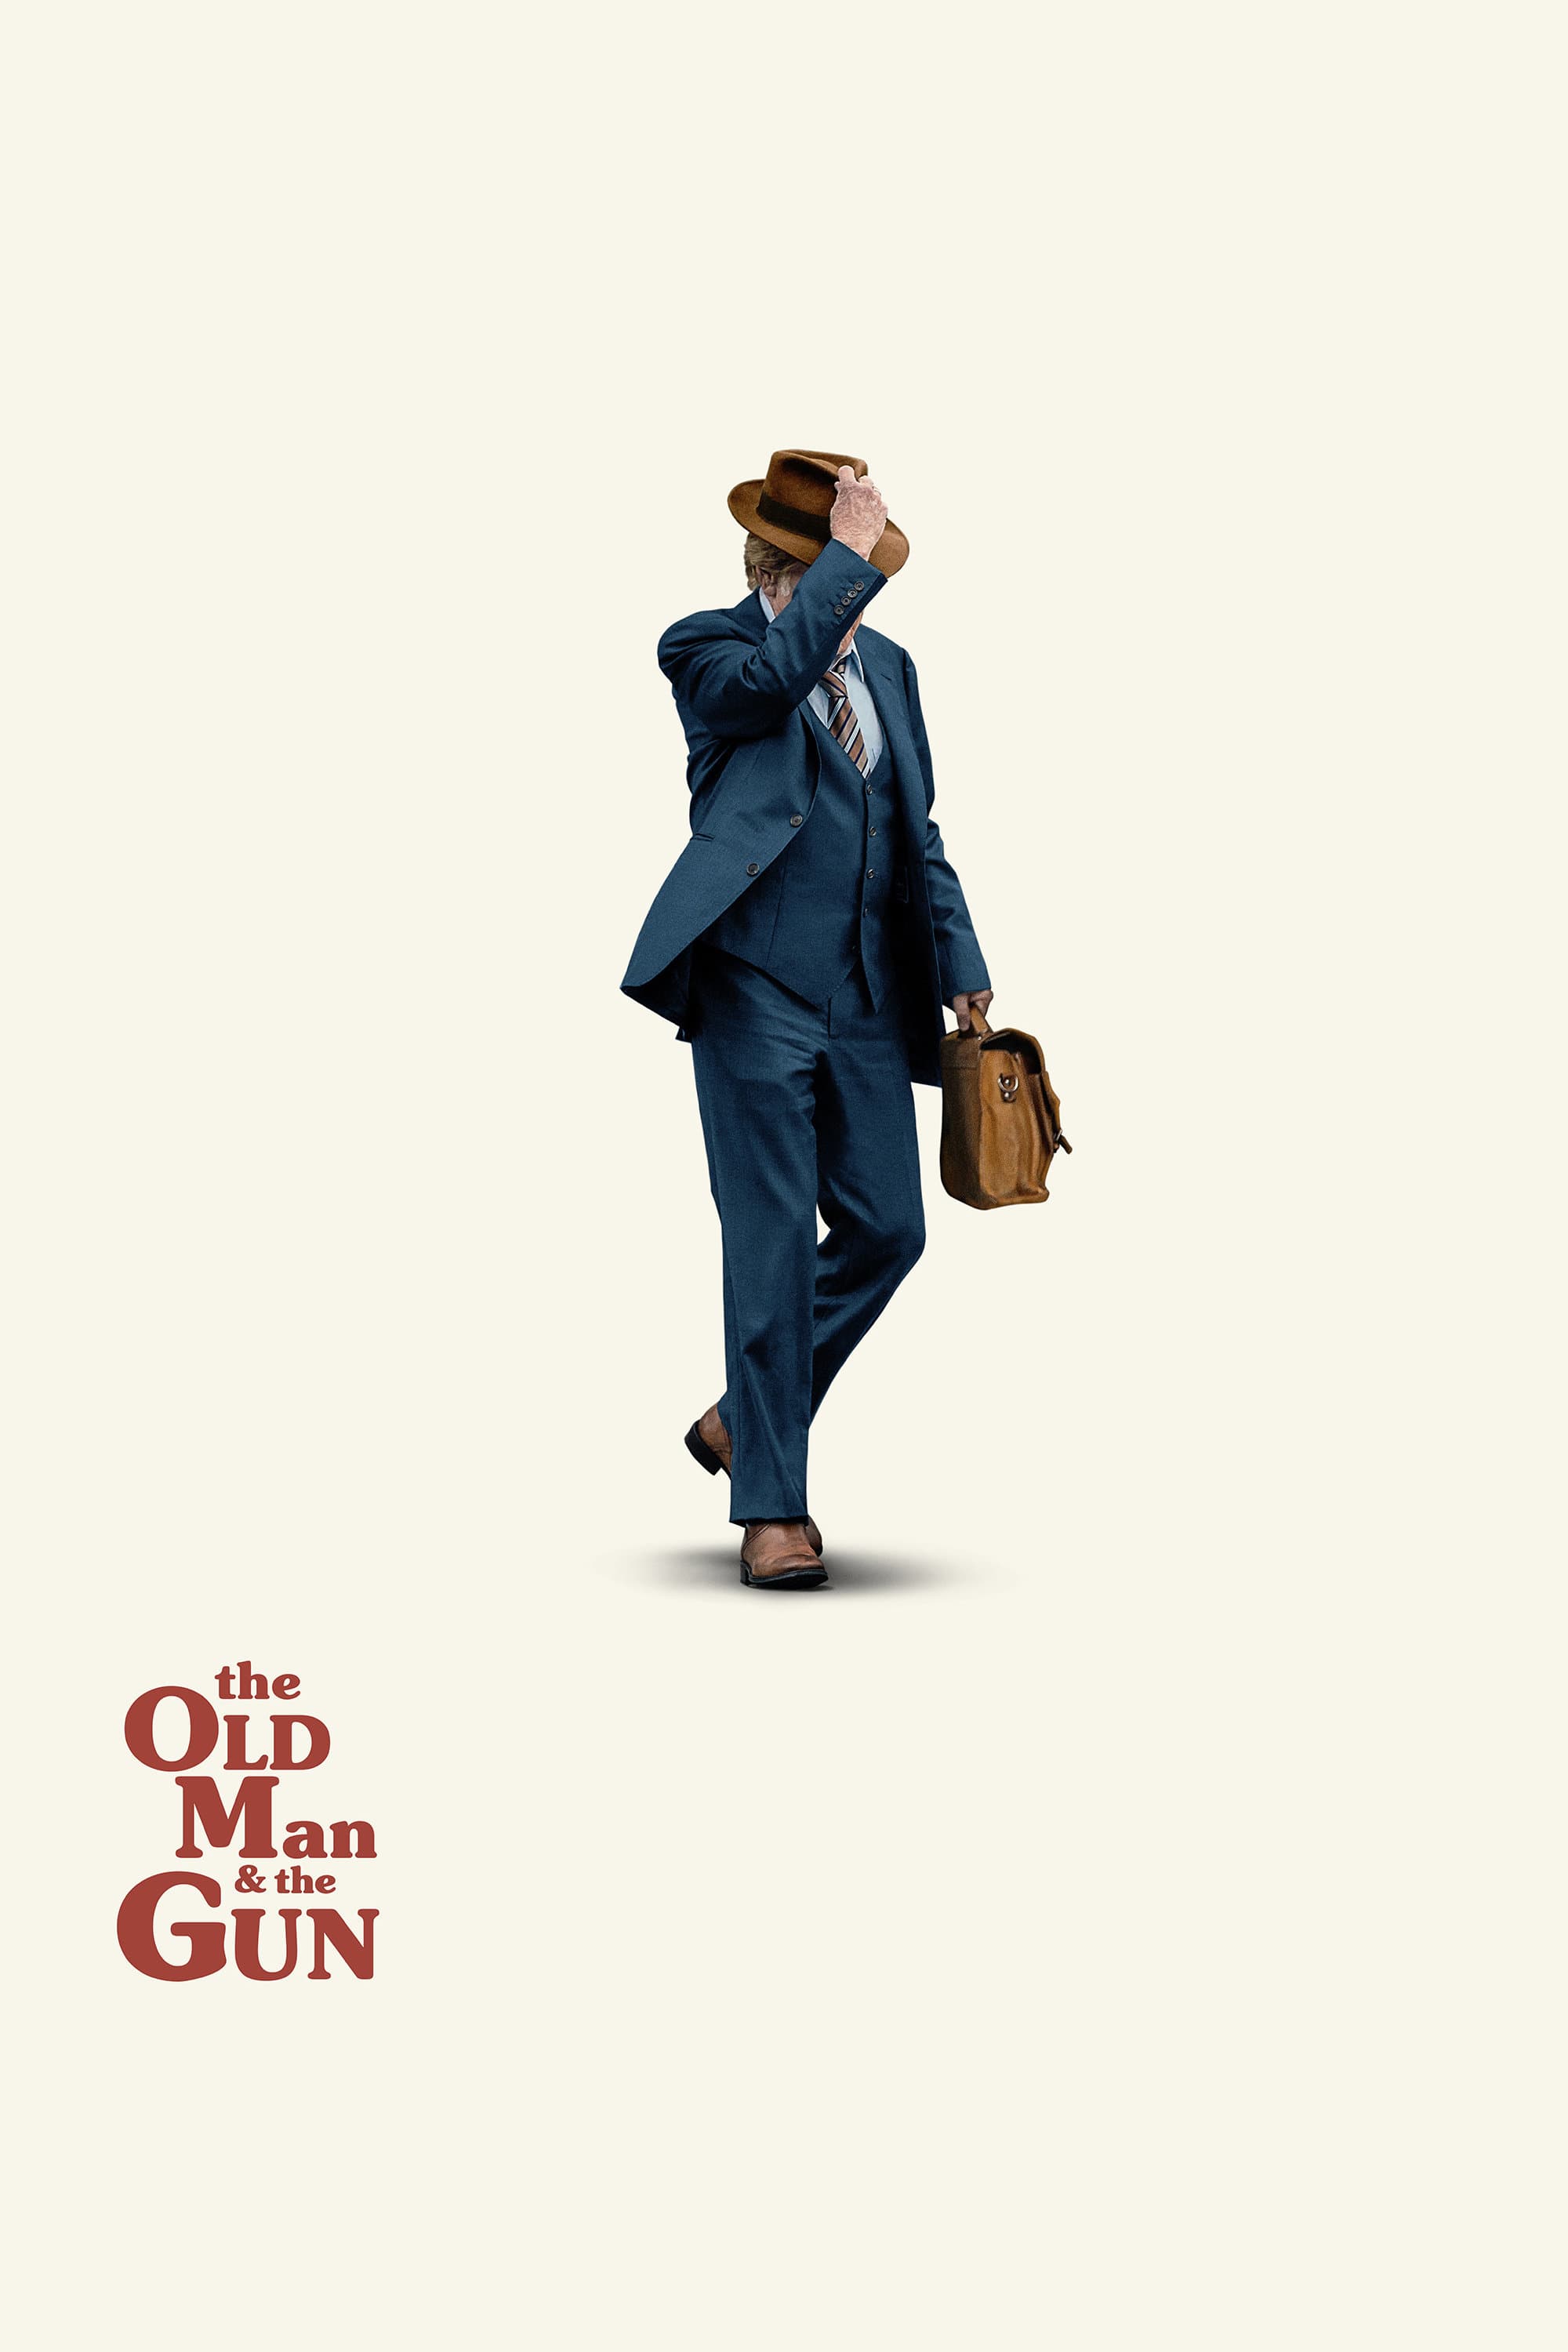 The Old Man & the Gun (2018) Official Trailer #1